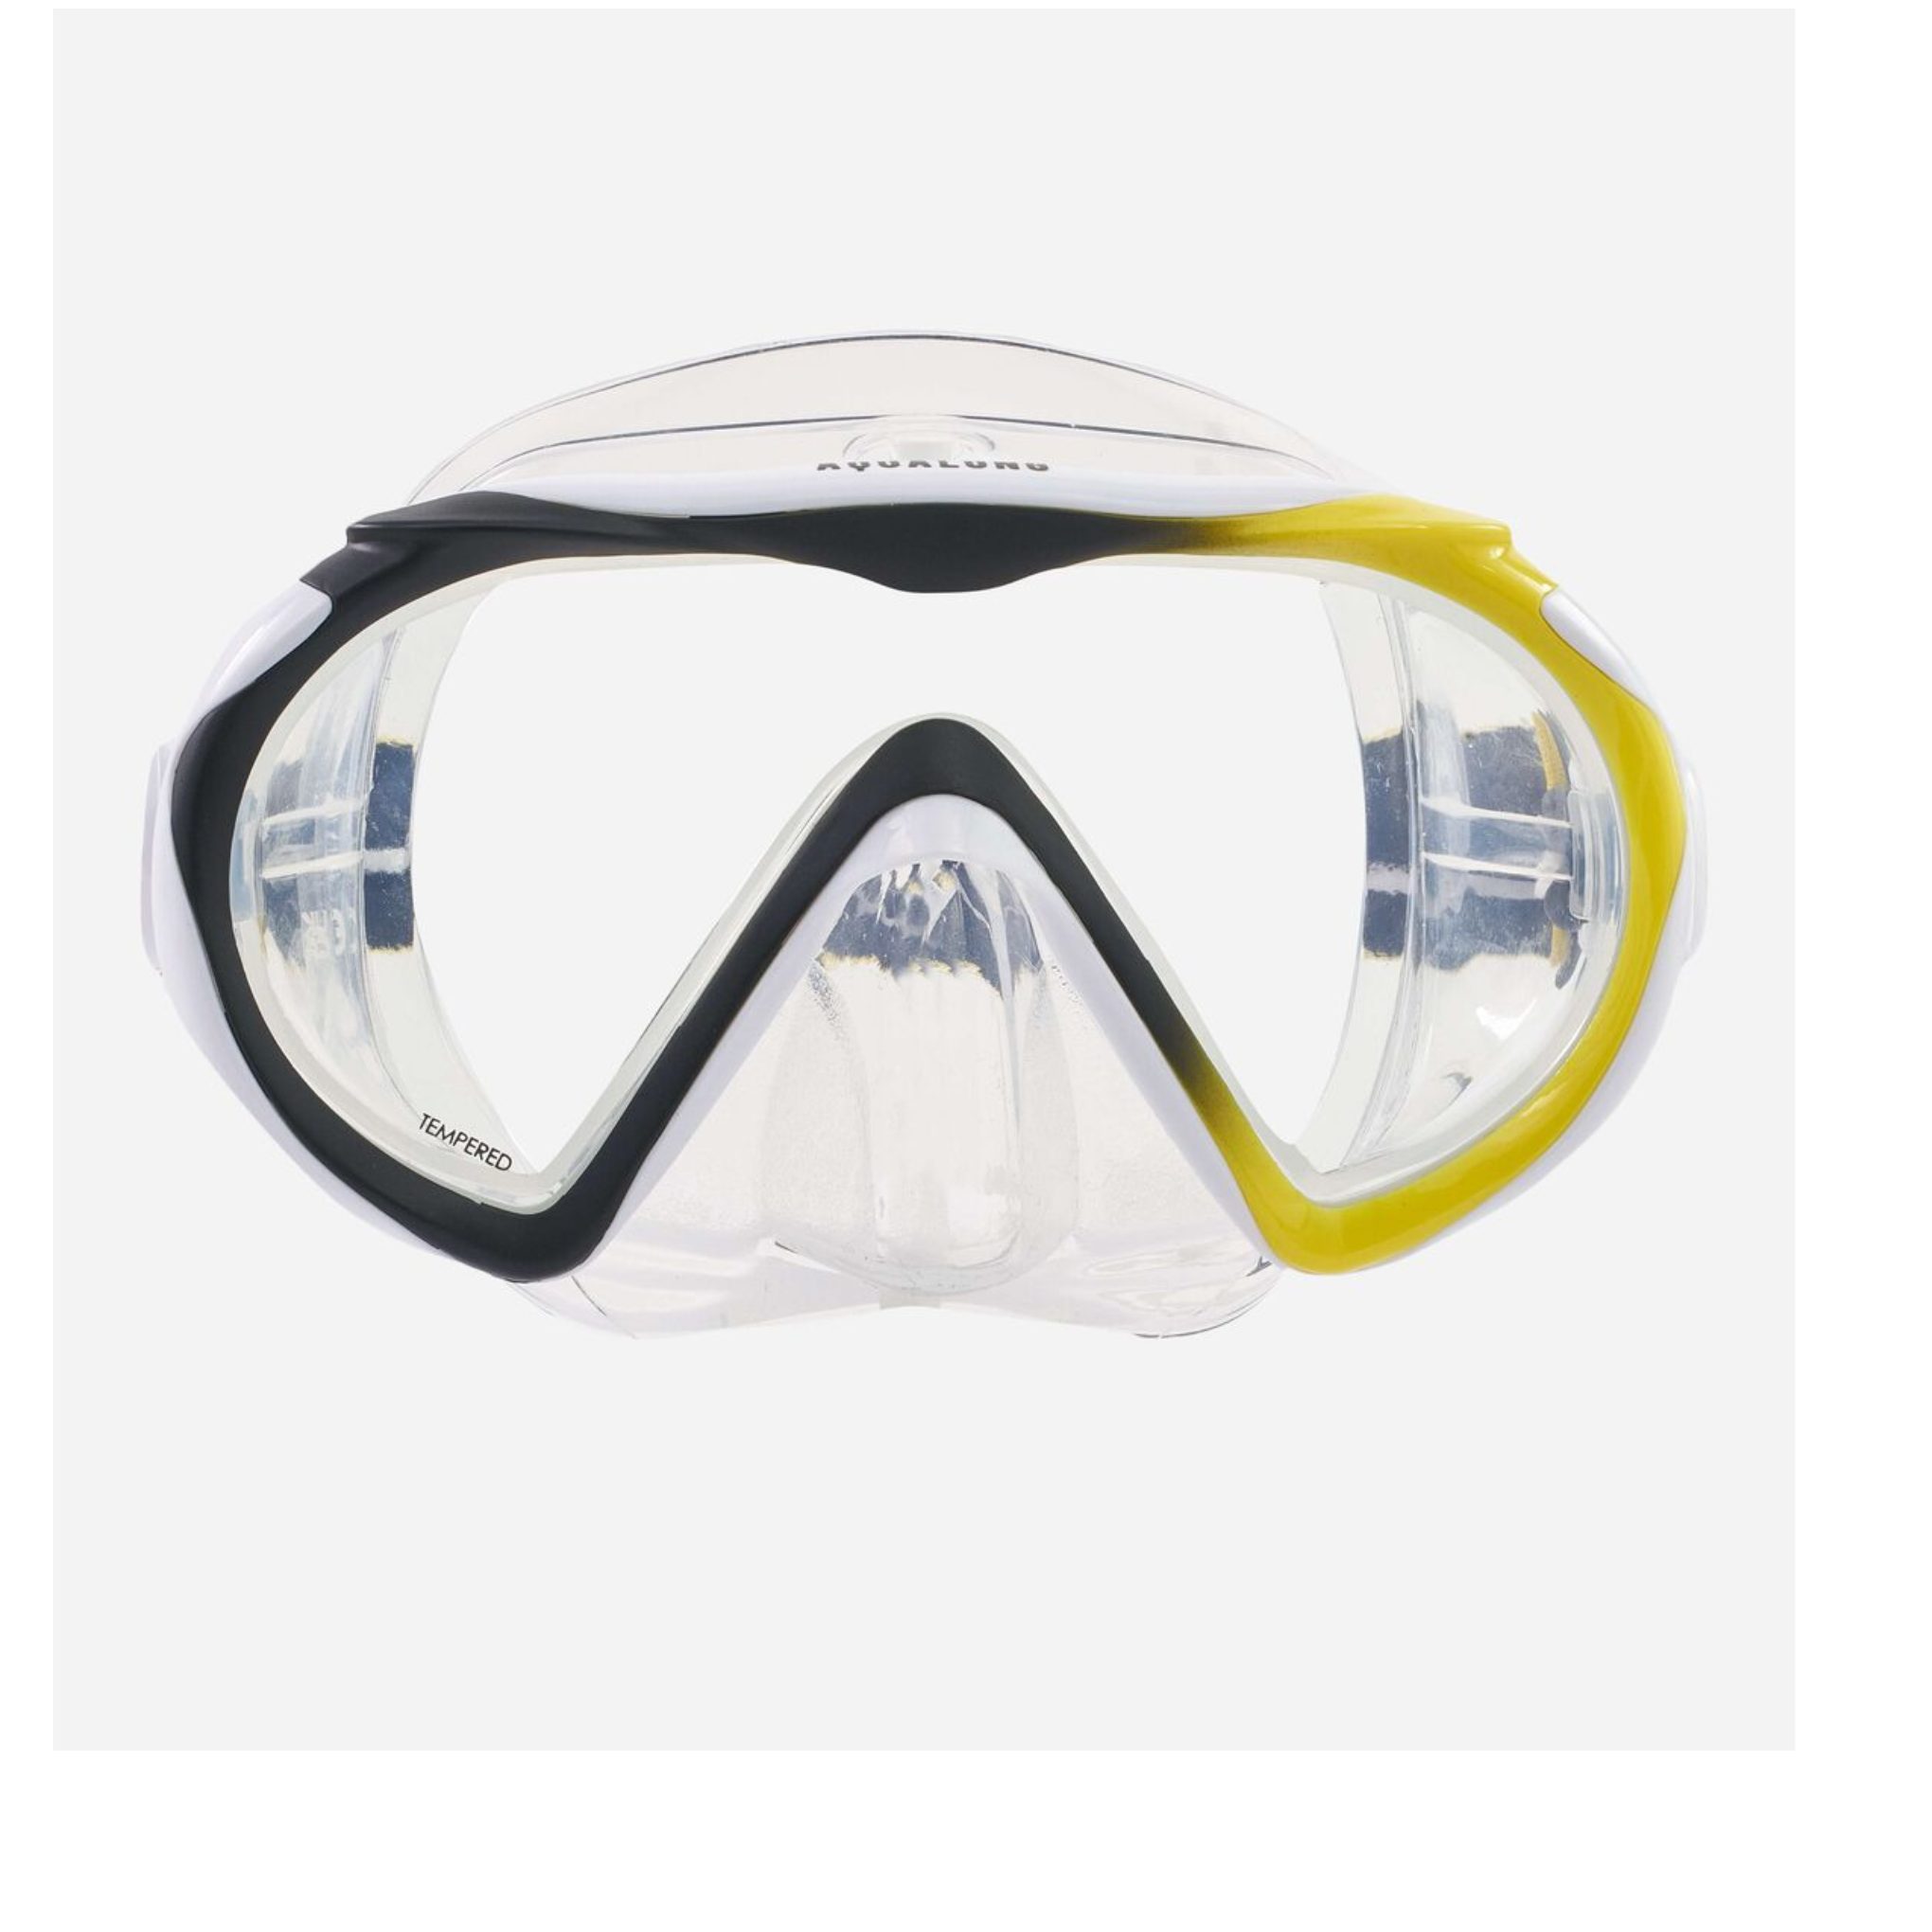 COMPASS Taucherbrille YELLOW Aqualung BLACK